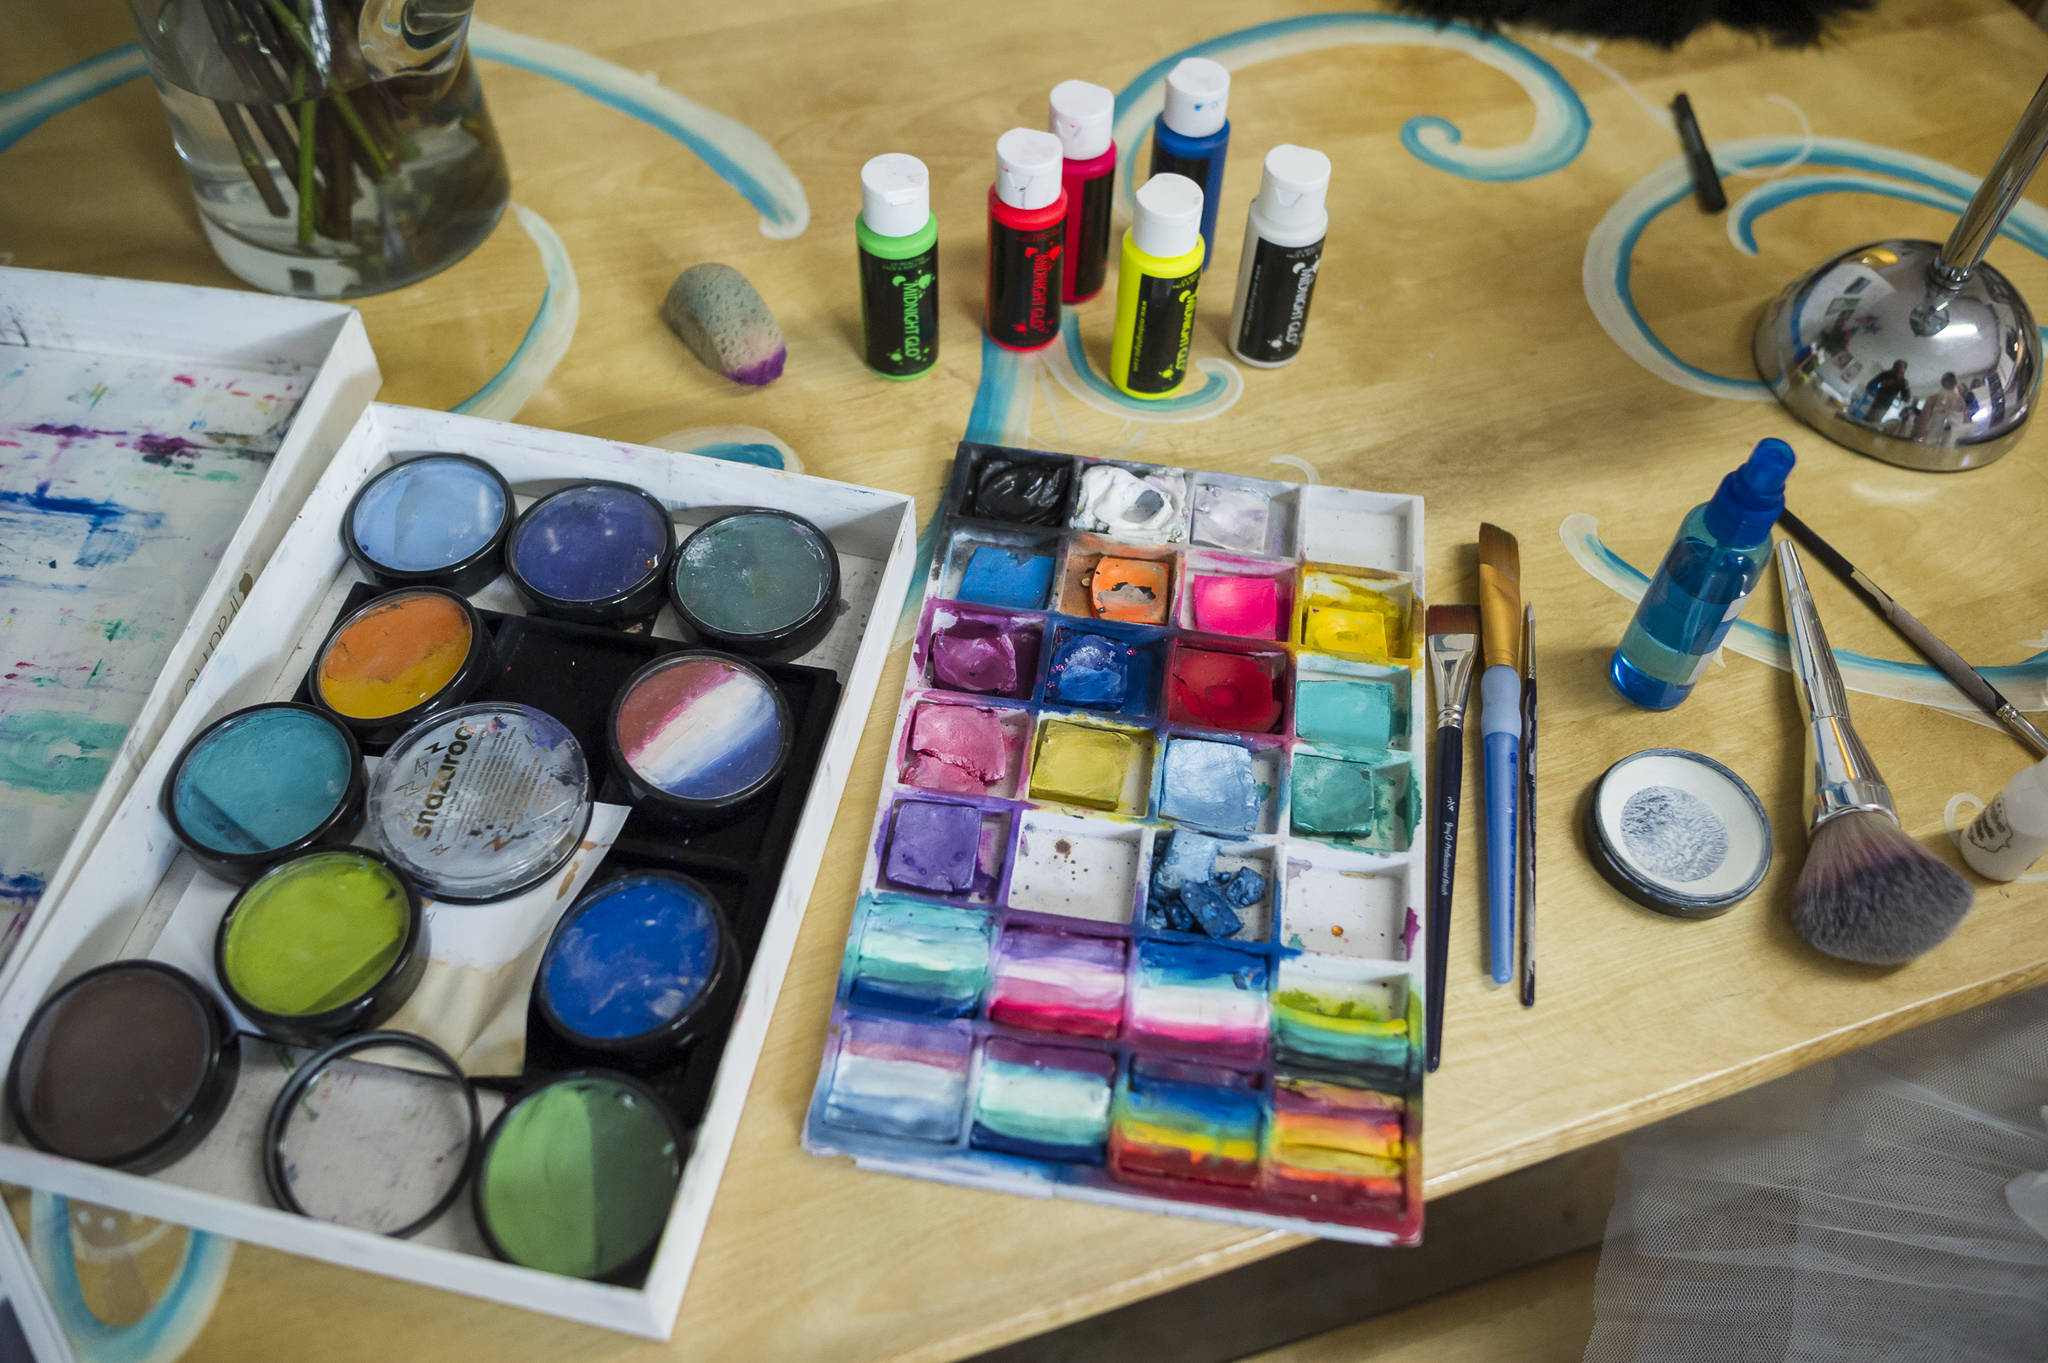 Jessie Snyder’s kit of supplies for face painting at her Mendenhall Valley home on Thursday, Oct. 18, 2018. (Michael Penn | Juneau Empire)